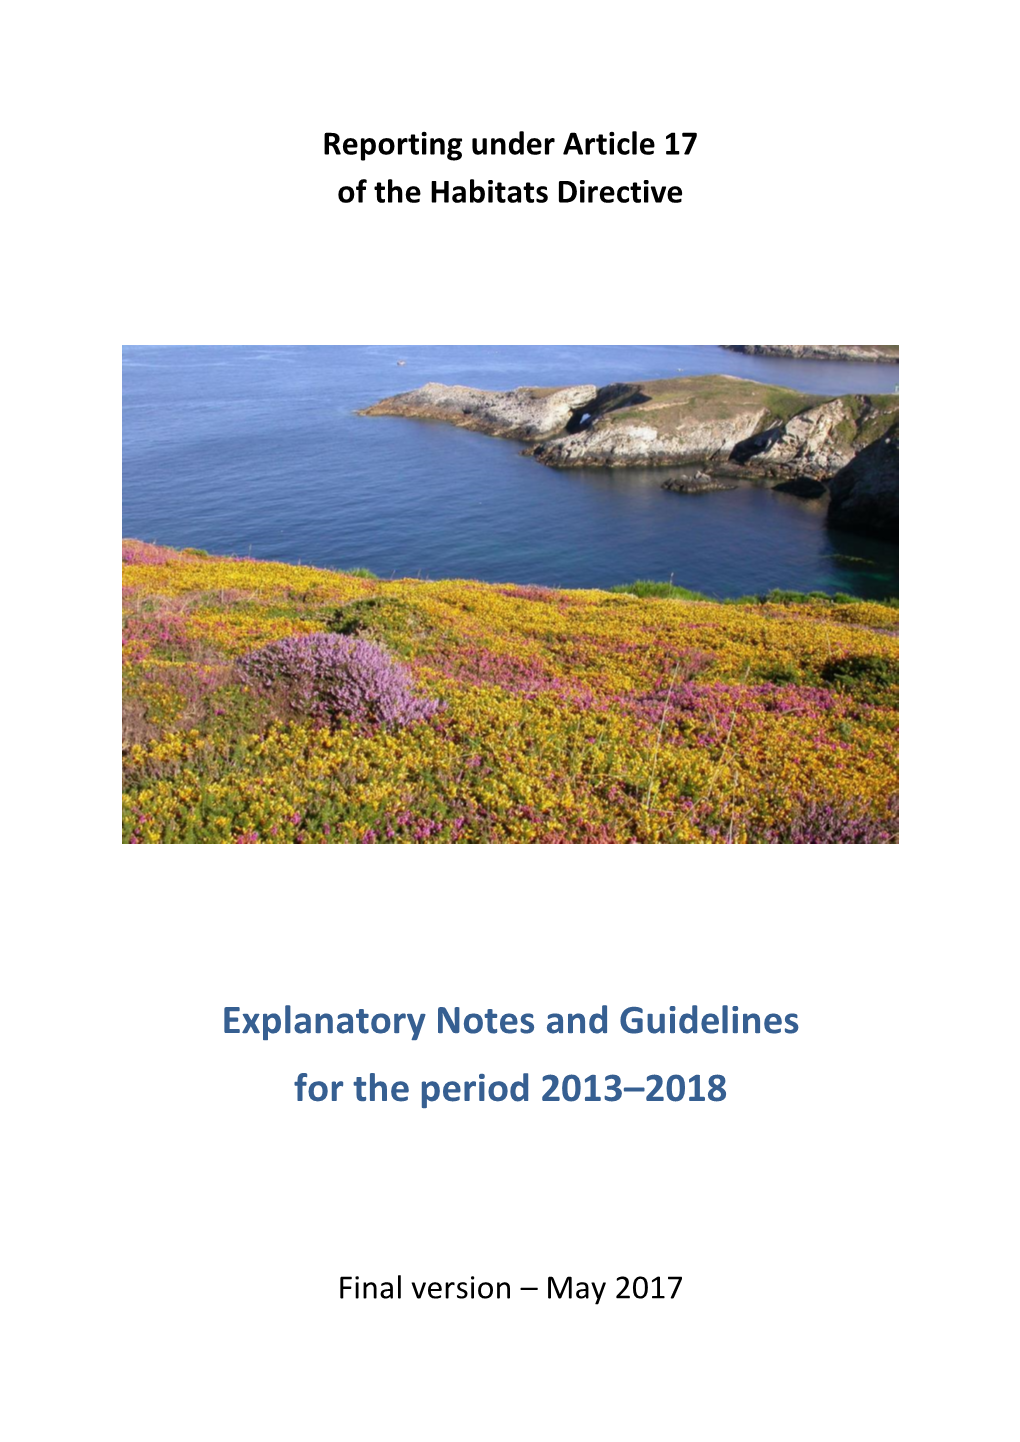 Explanatory Notes and Guidelines for the Period 2013–2018